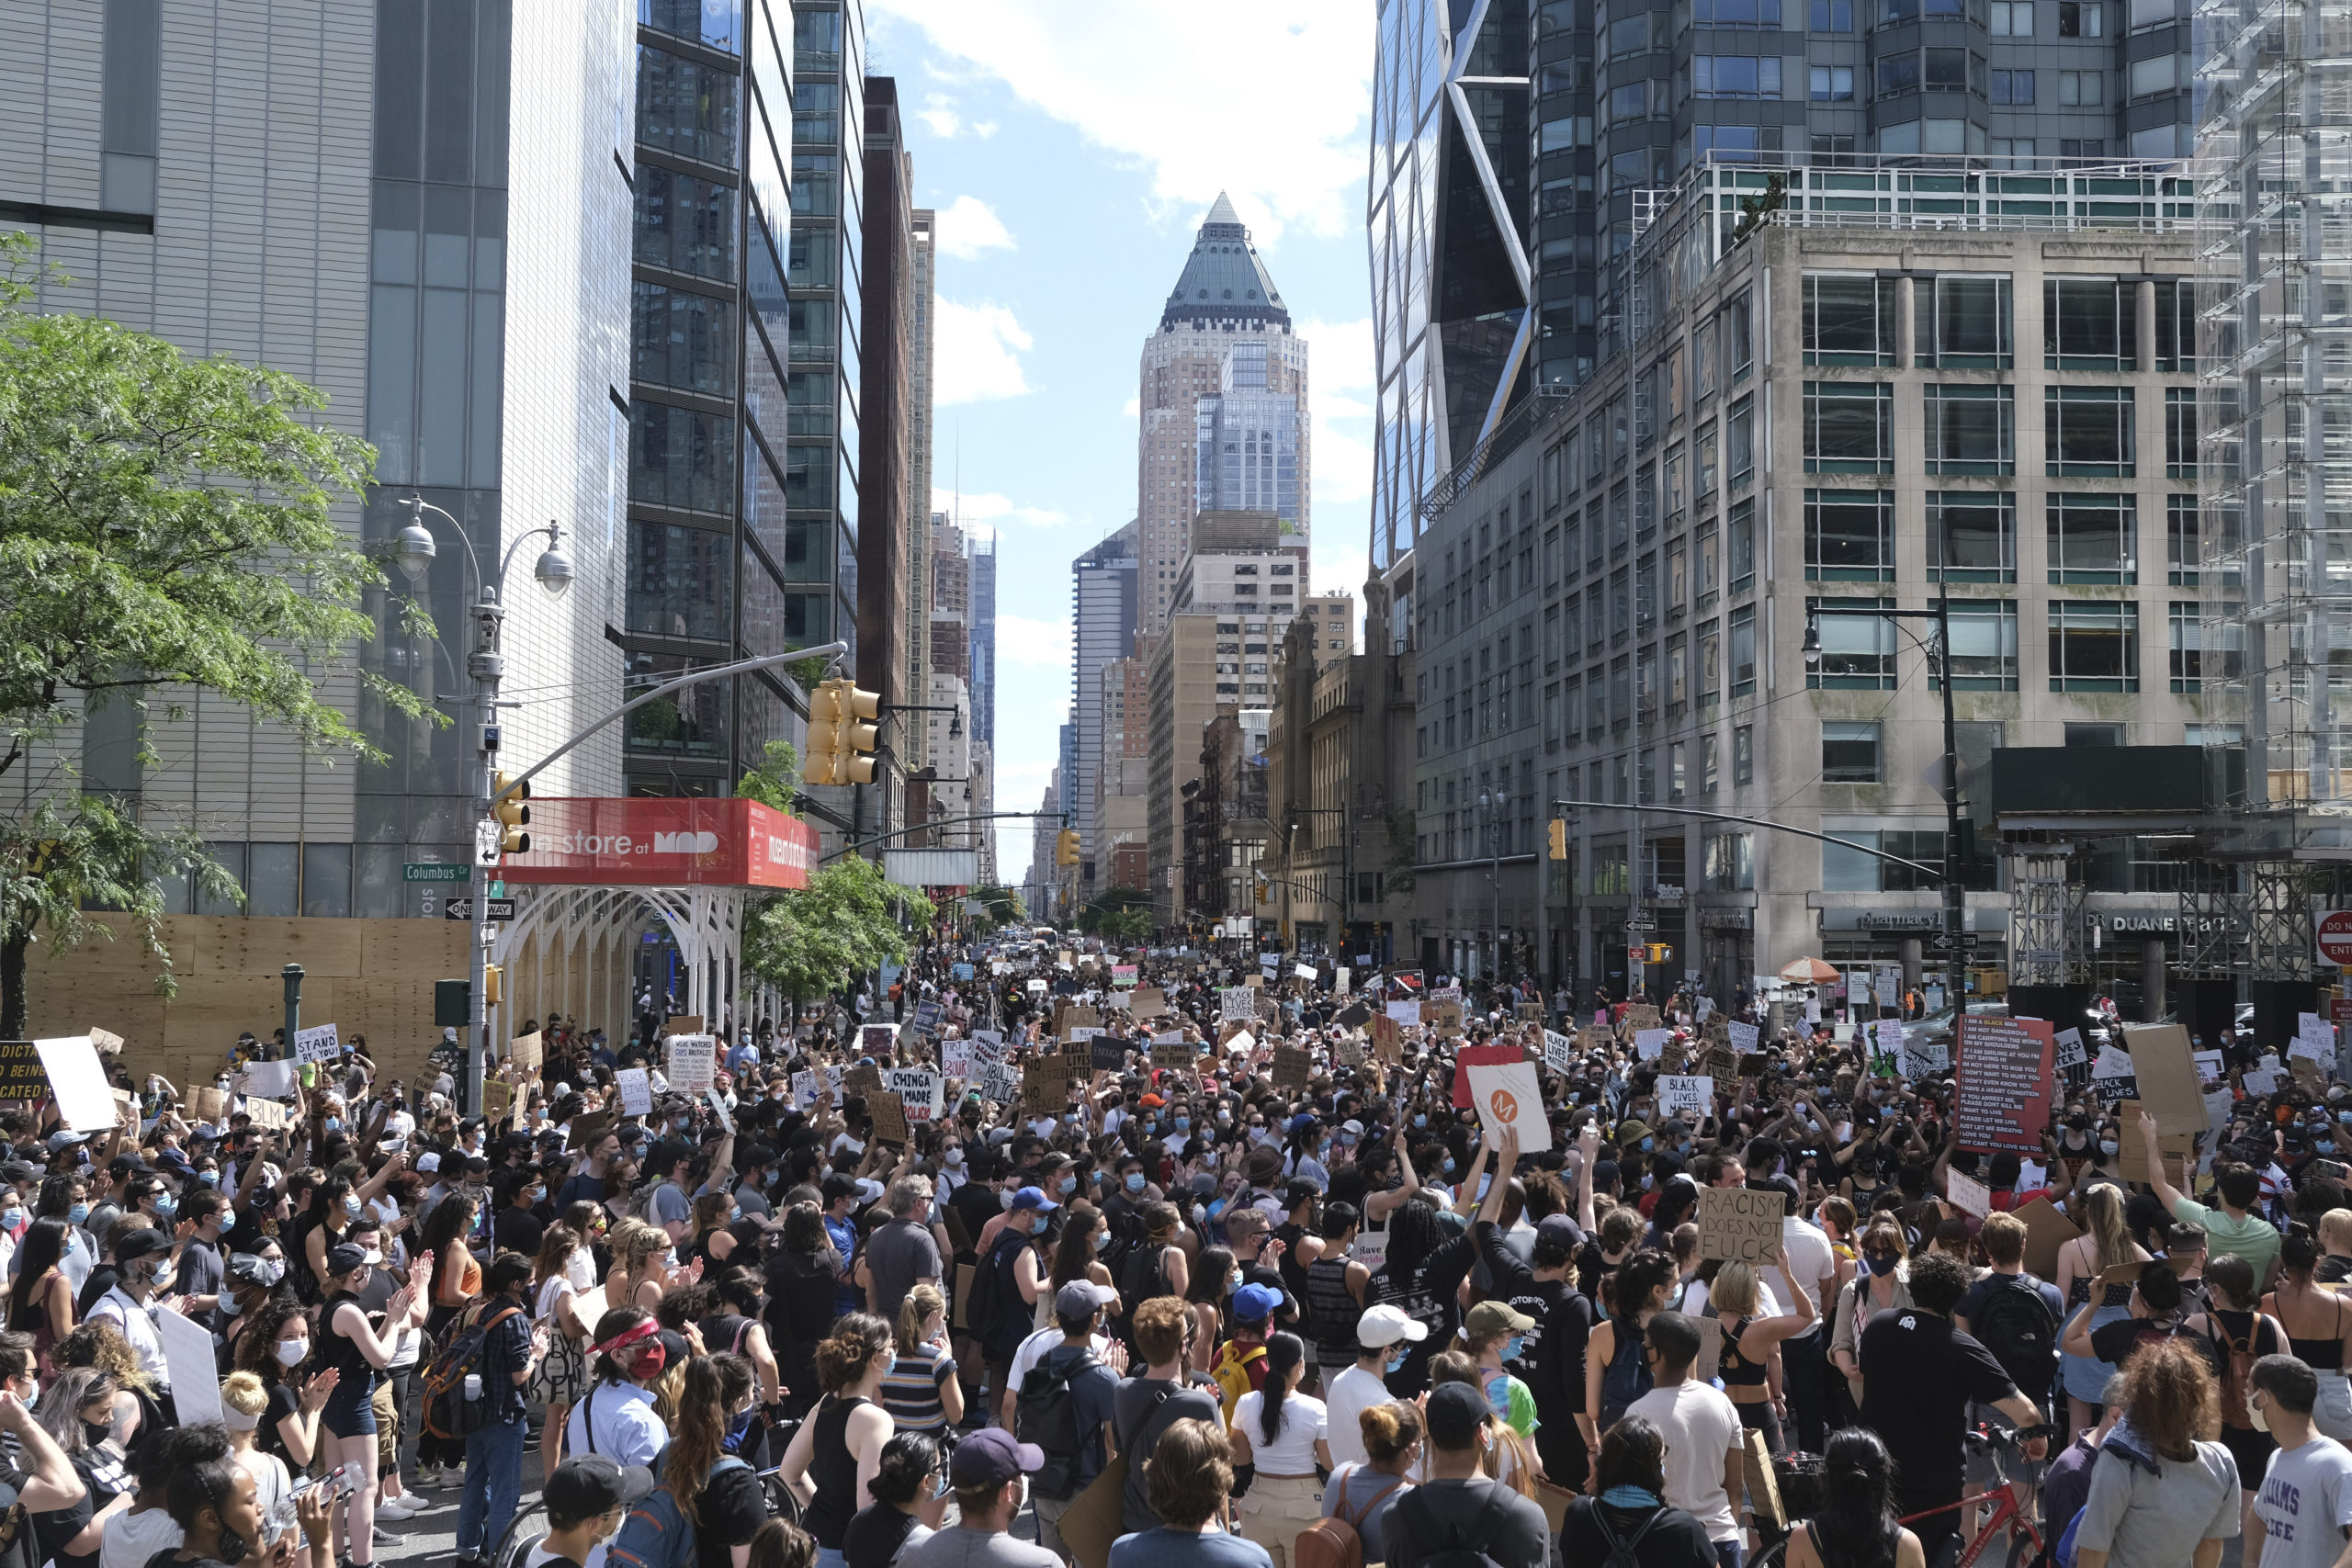 Protesters march through the streets of Manhattan, New York, Sunday, June 7, 2020. New York City lifted the curfew spurred by protests against police brutality ahead of schedule Sunday after a peaceful night, free of the clashes or ransacking of stores that rocked the city days earlier. (AP Photo/Seth Wenig)